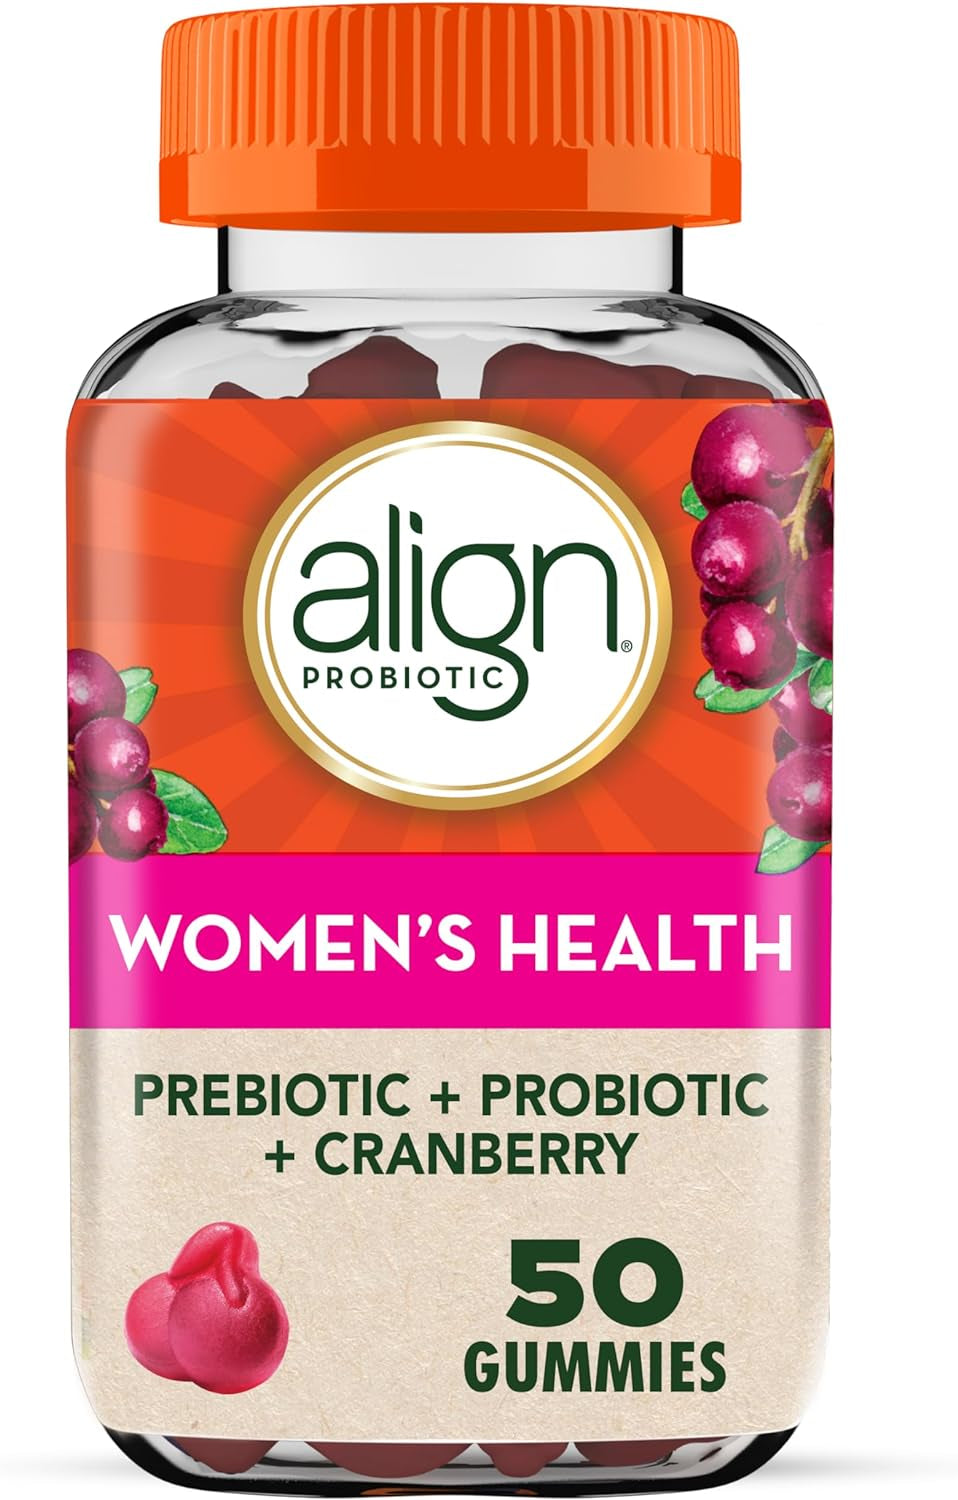 Align Digestive Health Gummies: Prebiotic + Probiotic for Men and Women, Natural Fruit Flavors, #1 Doctor Recommended - 50 Gummies